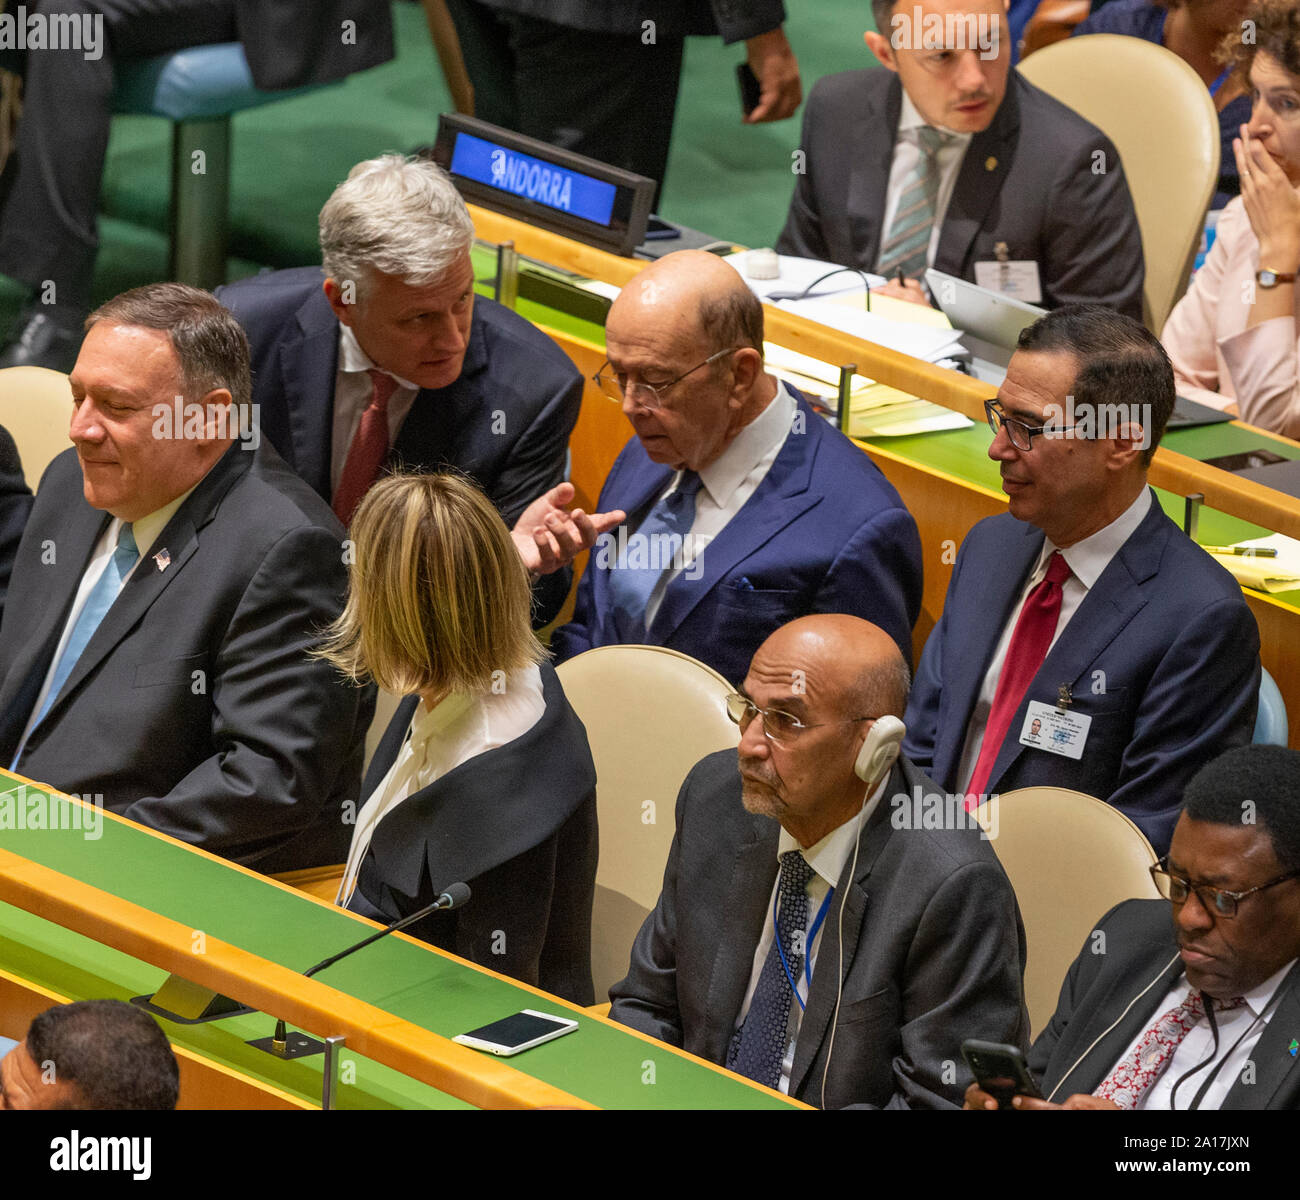 New York, NY - September 24, 2019: Mike Pompeo, Kelly Craft, Robert O'Brien, Wilbur Ross, Steven Mnuchin attend United Nations 74th General Assembly at UN Headquarters Stock Photo